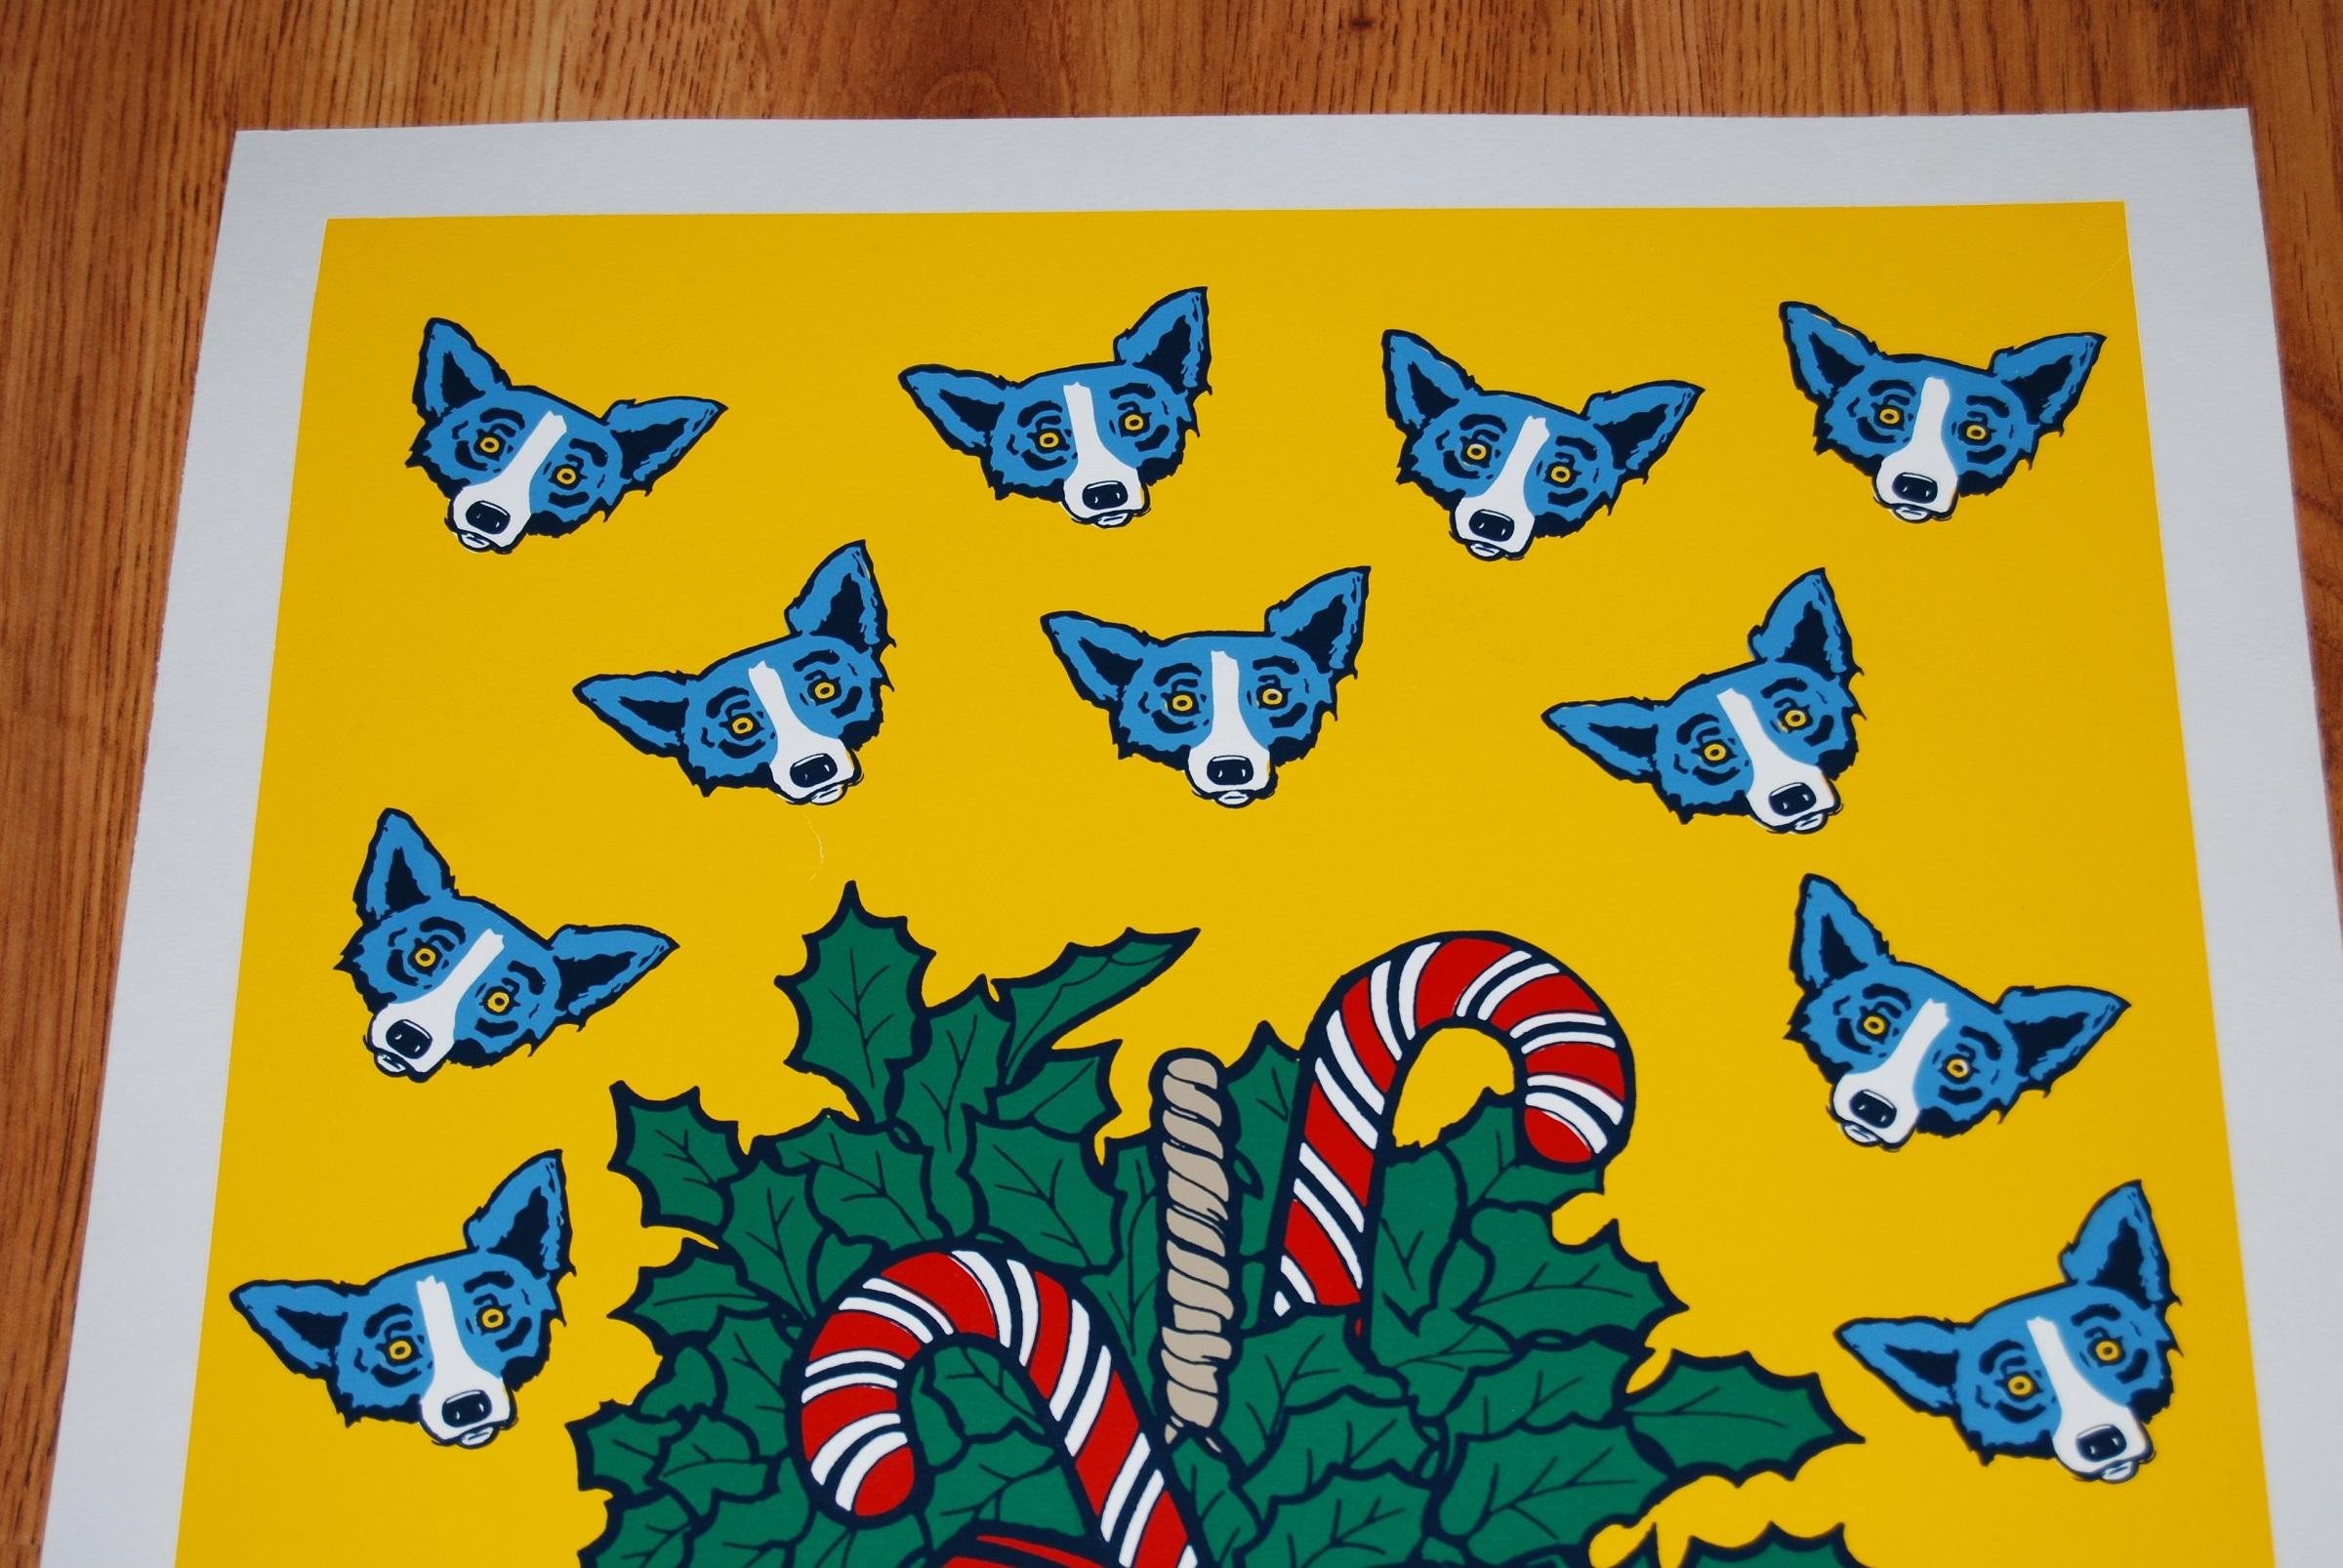 This Blue Dog work consists of a yellow background with 15 dog heads, a basket of holly & candy canes embellished with a red and blue striped ribbon.  All the dog faces have soulful yellow eyes.  This pop art animal original silkscreen print on